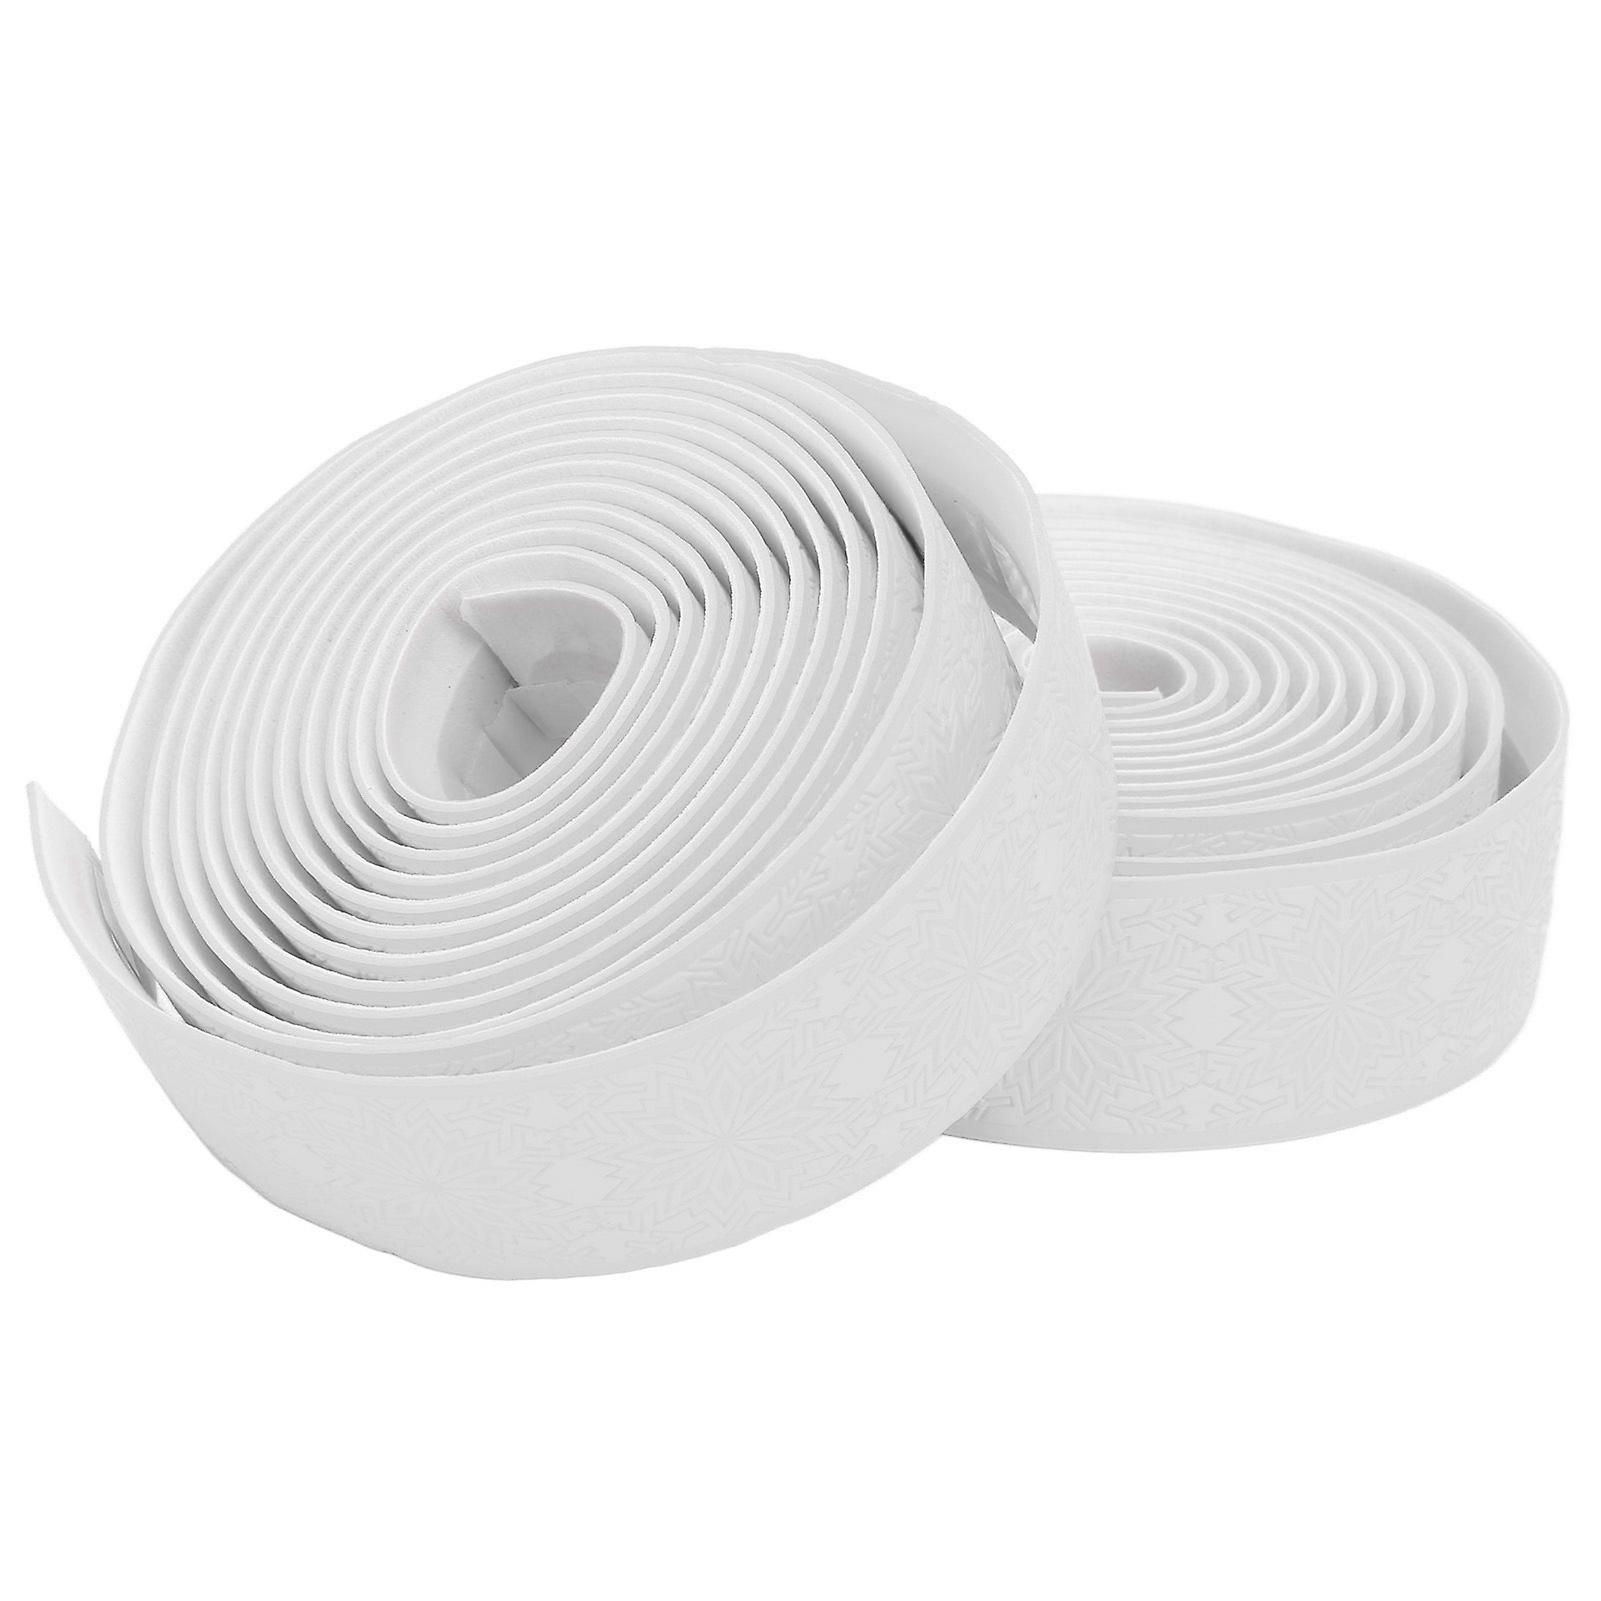 Bolany Road Handlebar Tape Absorb Sweat Easy To Clean Waterproof Bicycle Handlebar Tapessnowflake White